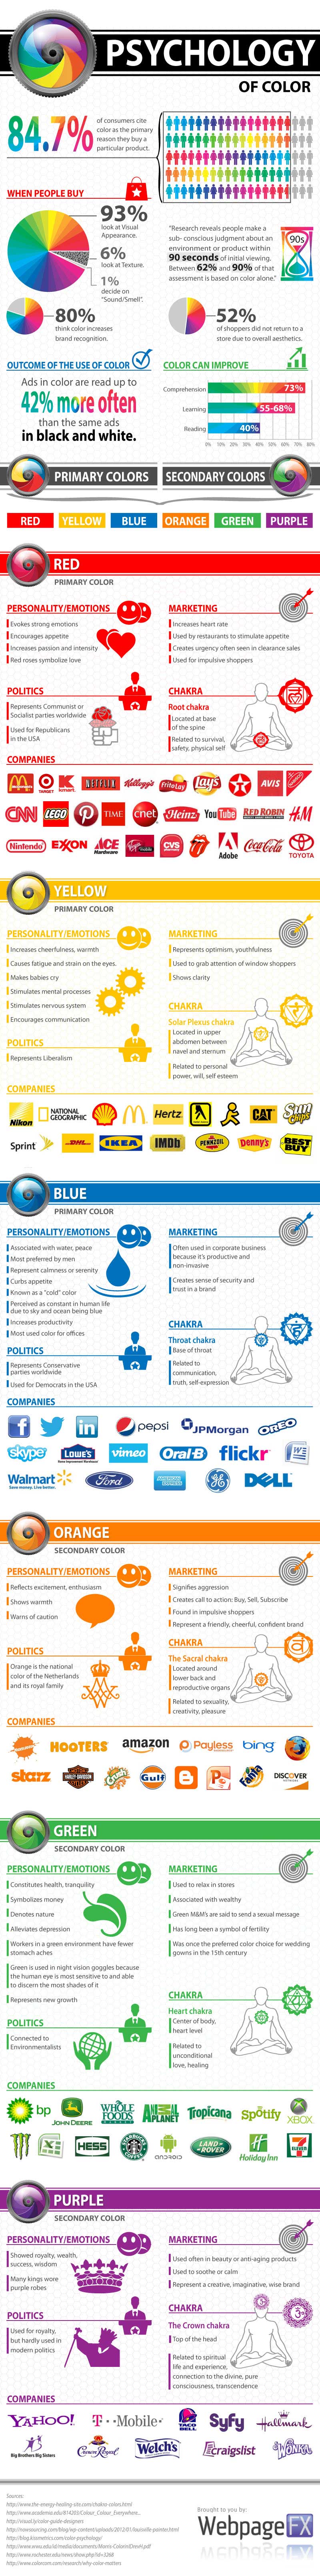 Curious about the psychology of color? Wondering how color influences marketing and sales? Learn to use color better from this infographic!